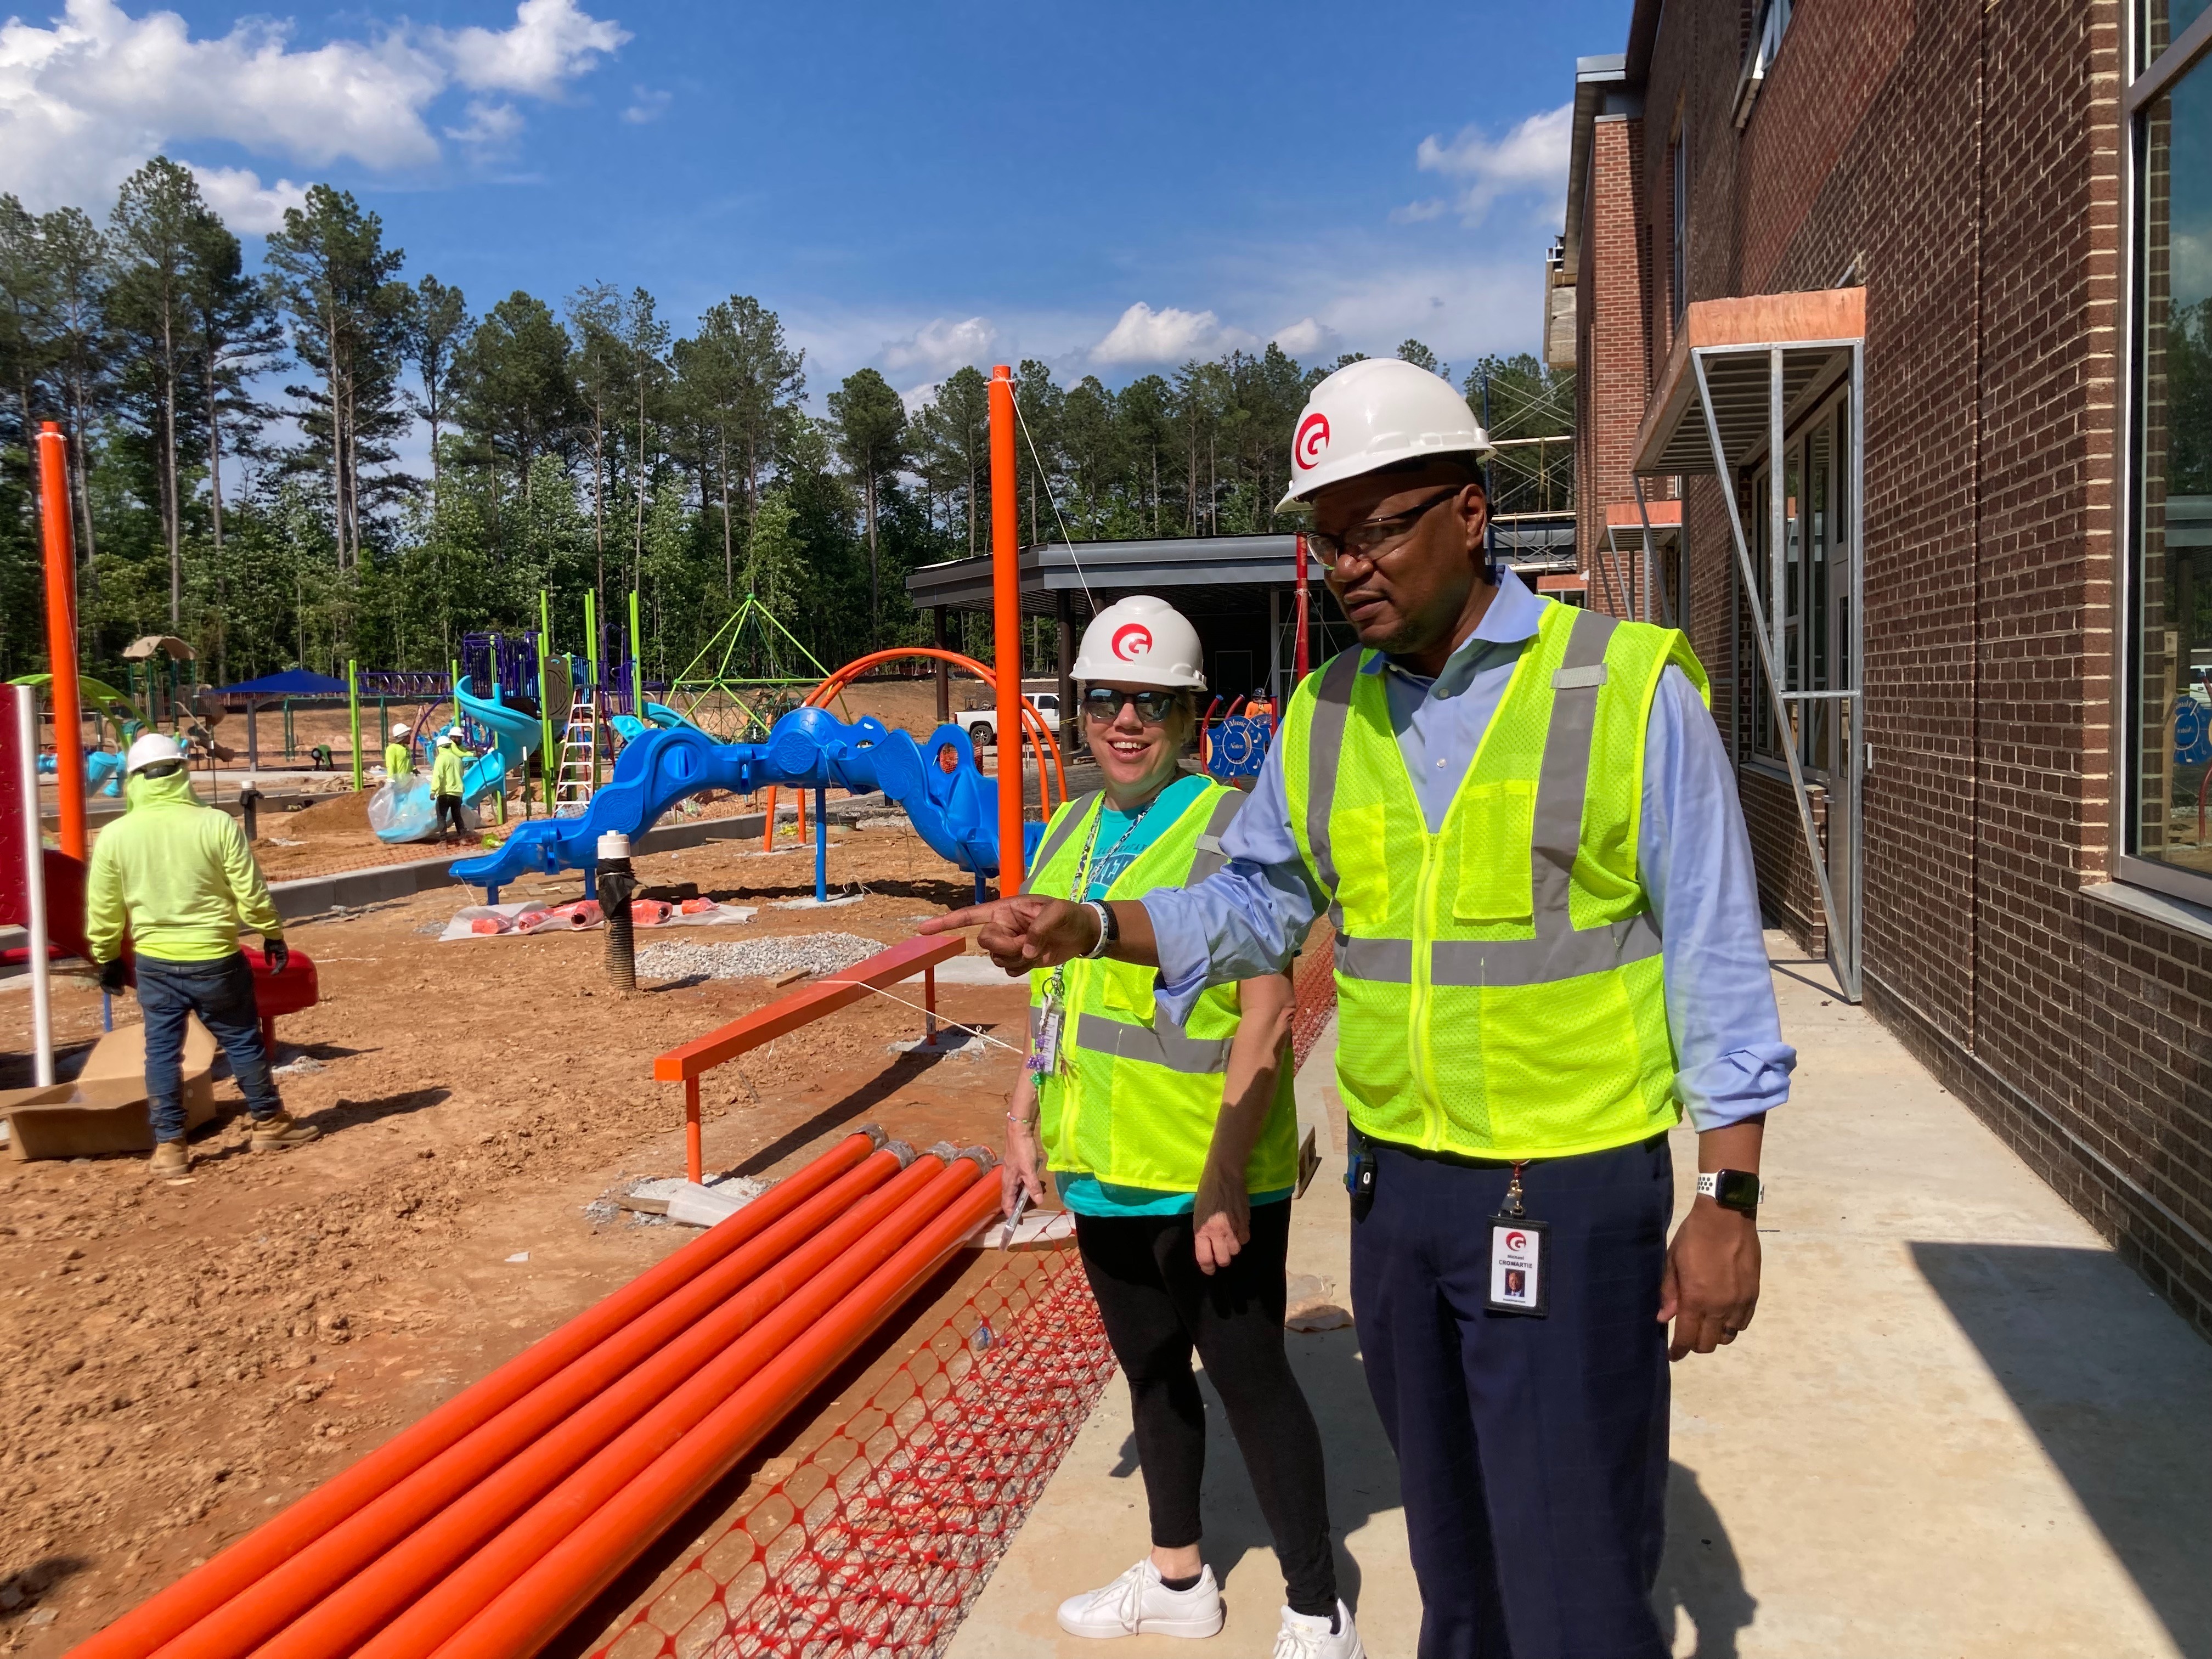 Principal McCay and Superintendent Cromartie check out the preschool play equipment as it was being installed.